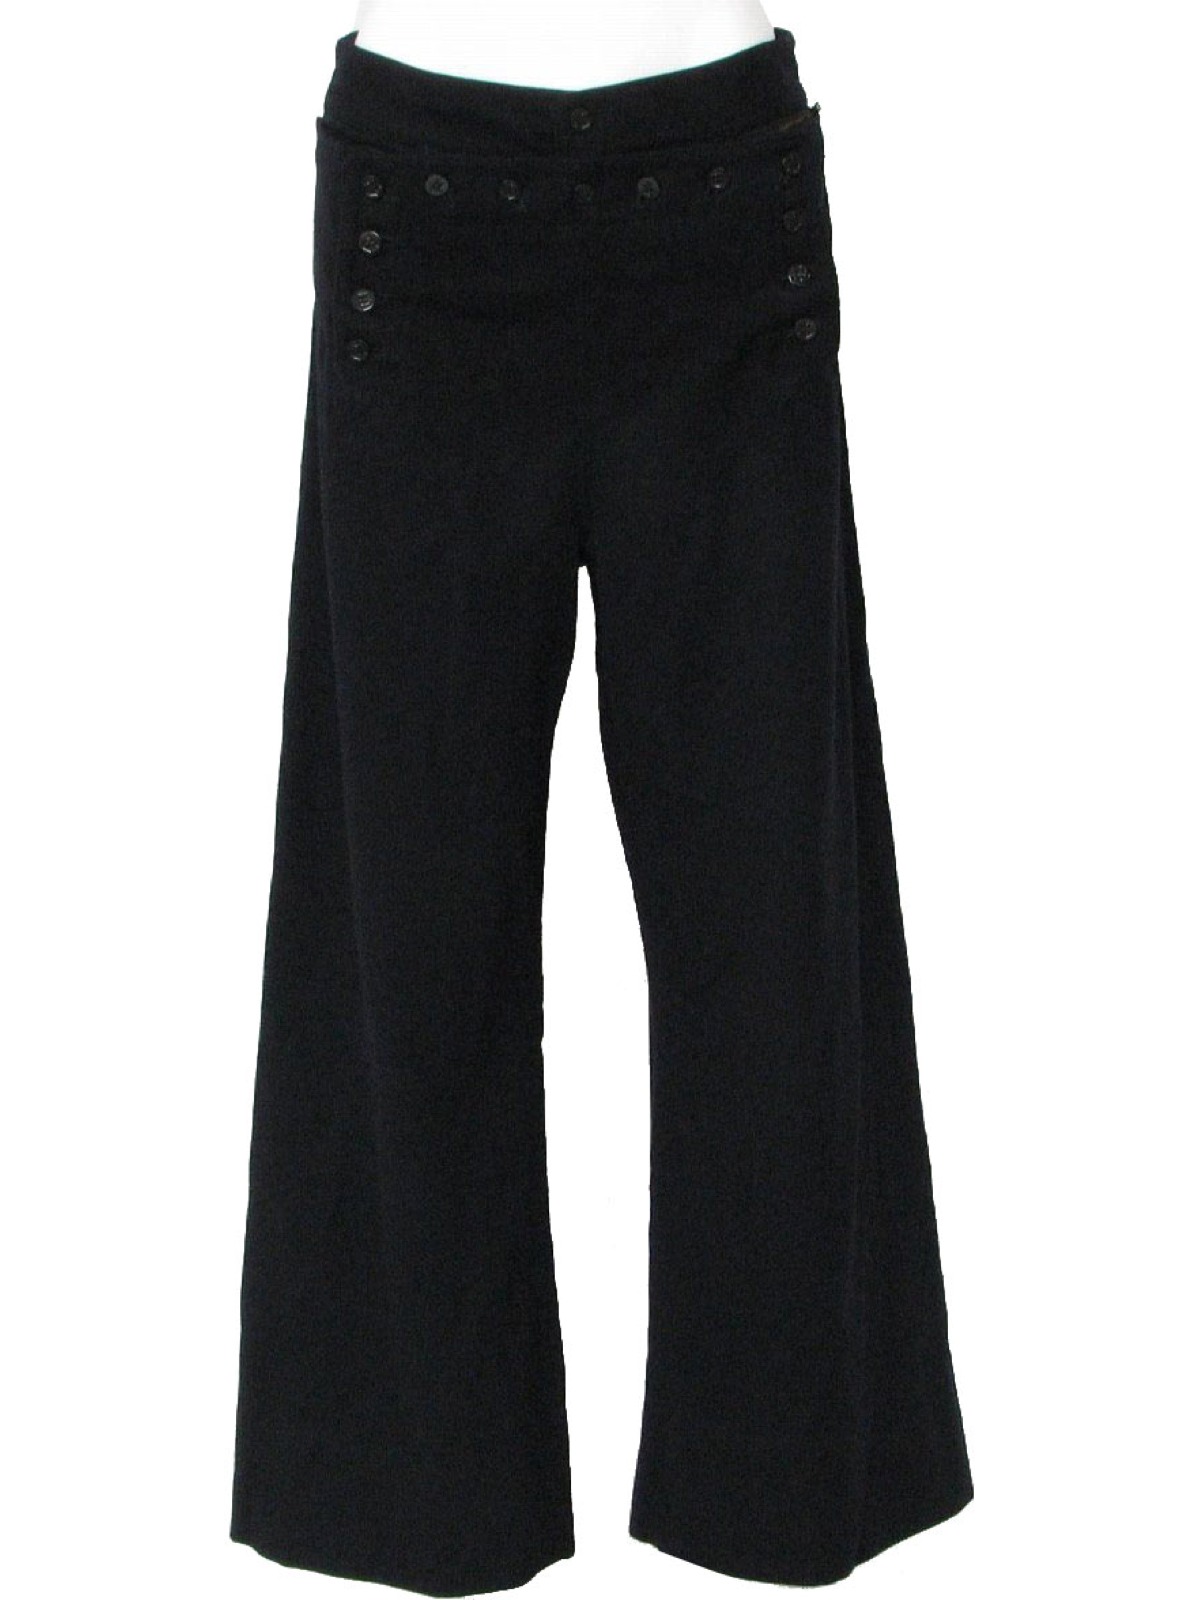 Retro 1960's Bellbottom Pants (Navy Issue) : 60s -Navy Issue- Mens ...